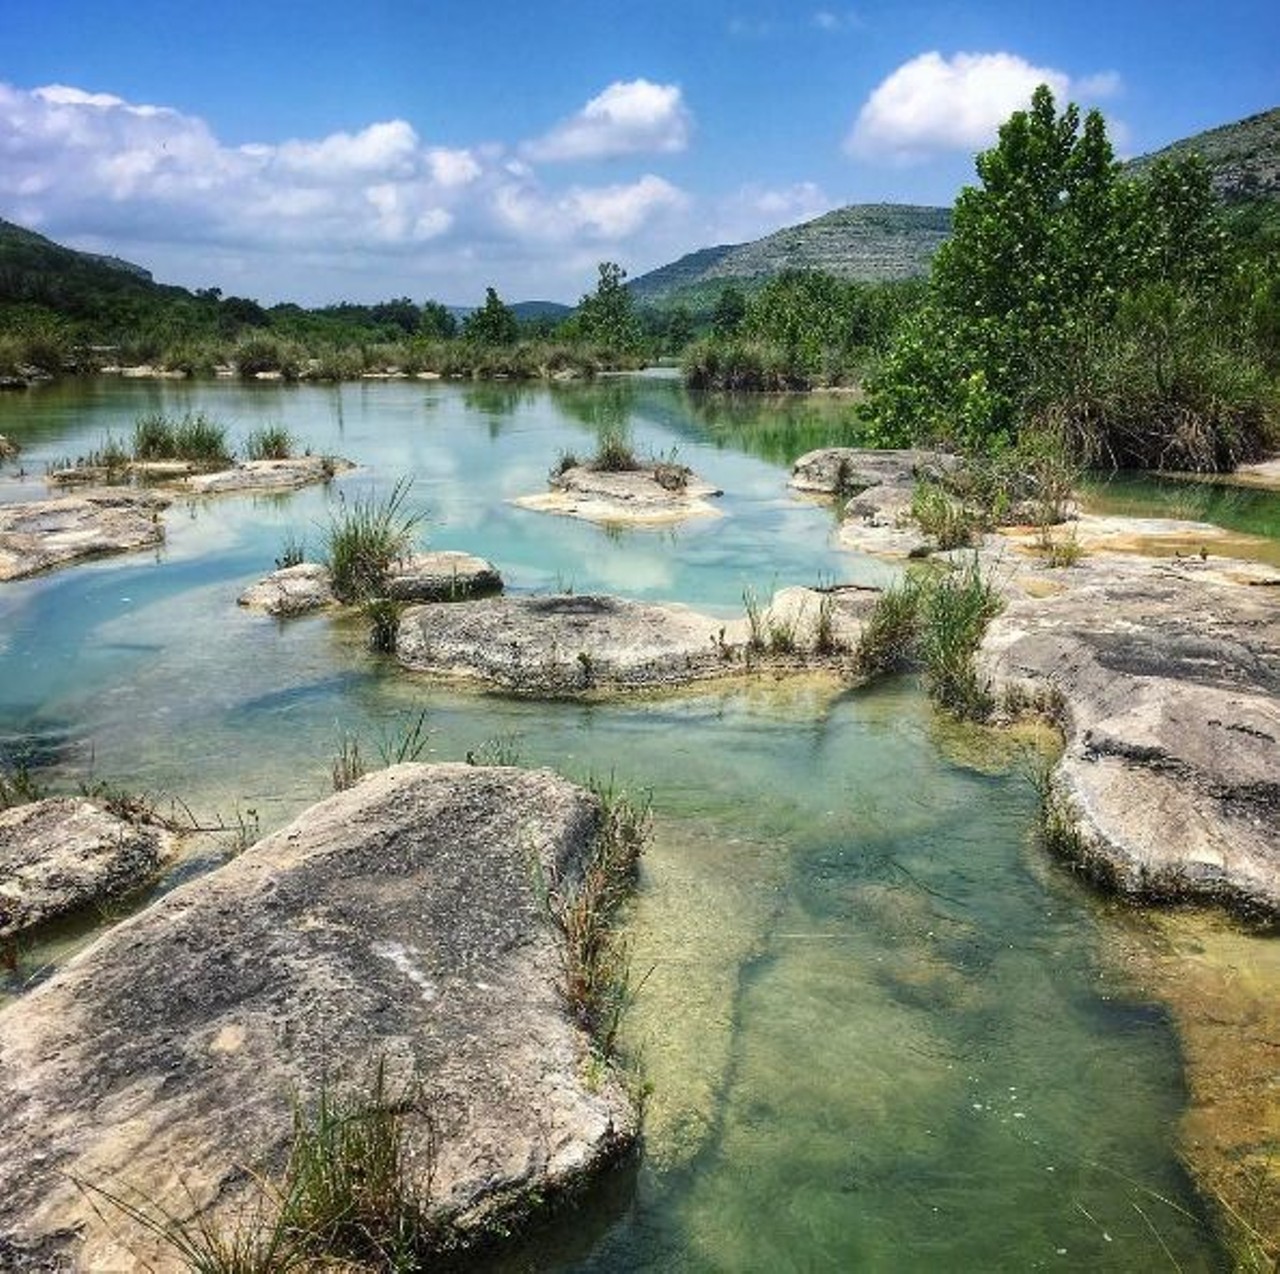 Devils River State Natural Area
21715 Dolan Creek Rd, Del Rio, (830) 395-2133, tpwd.texas.gov/state-parks/devils-river
You might scratch up your body on the rocks, but the water is totally worth it.
Photo via Instagram, jcra8ton